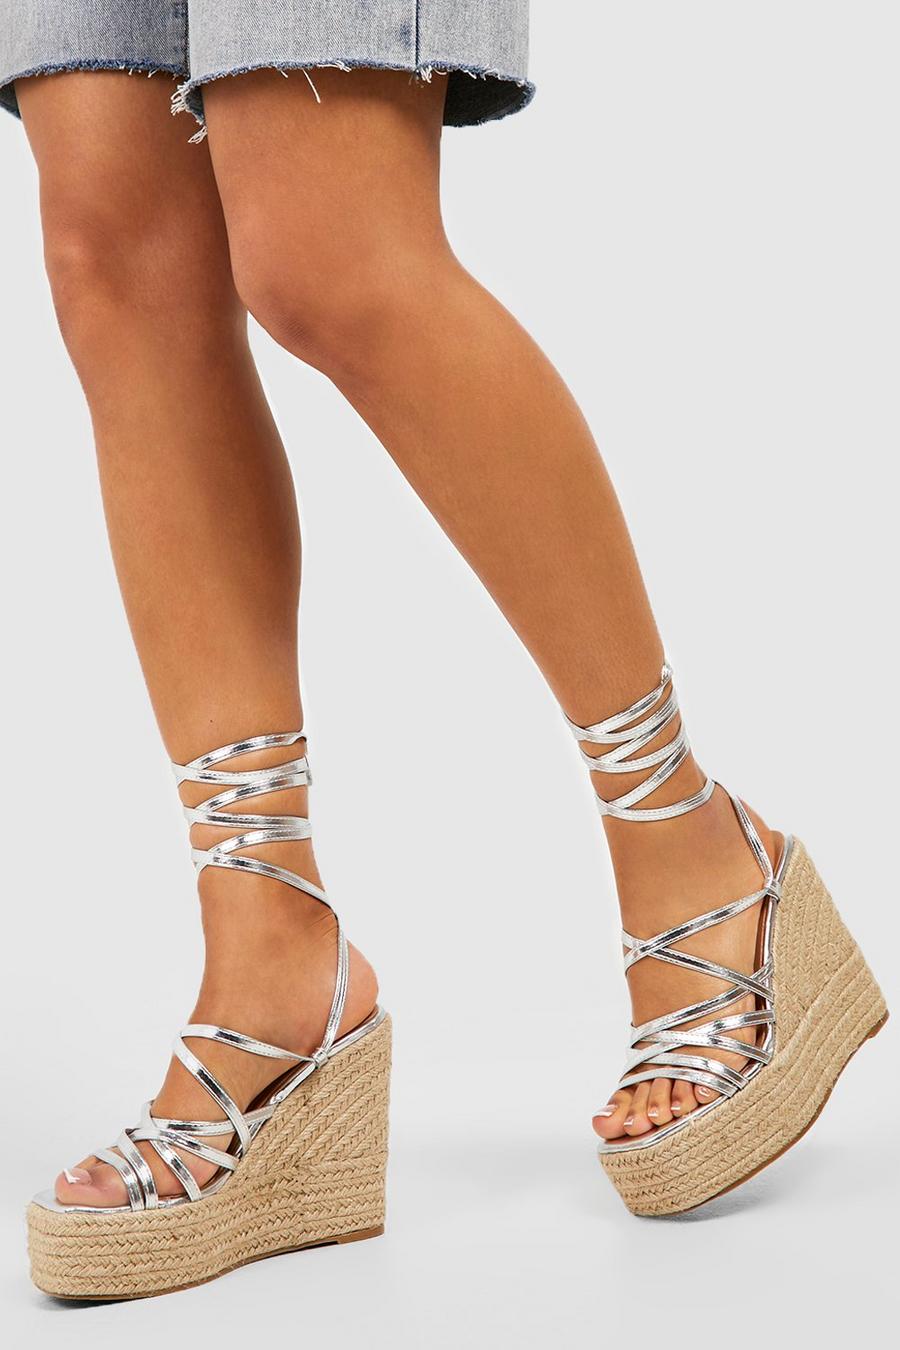 Silver Metallic Strappy Wrap Up Wedges